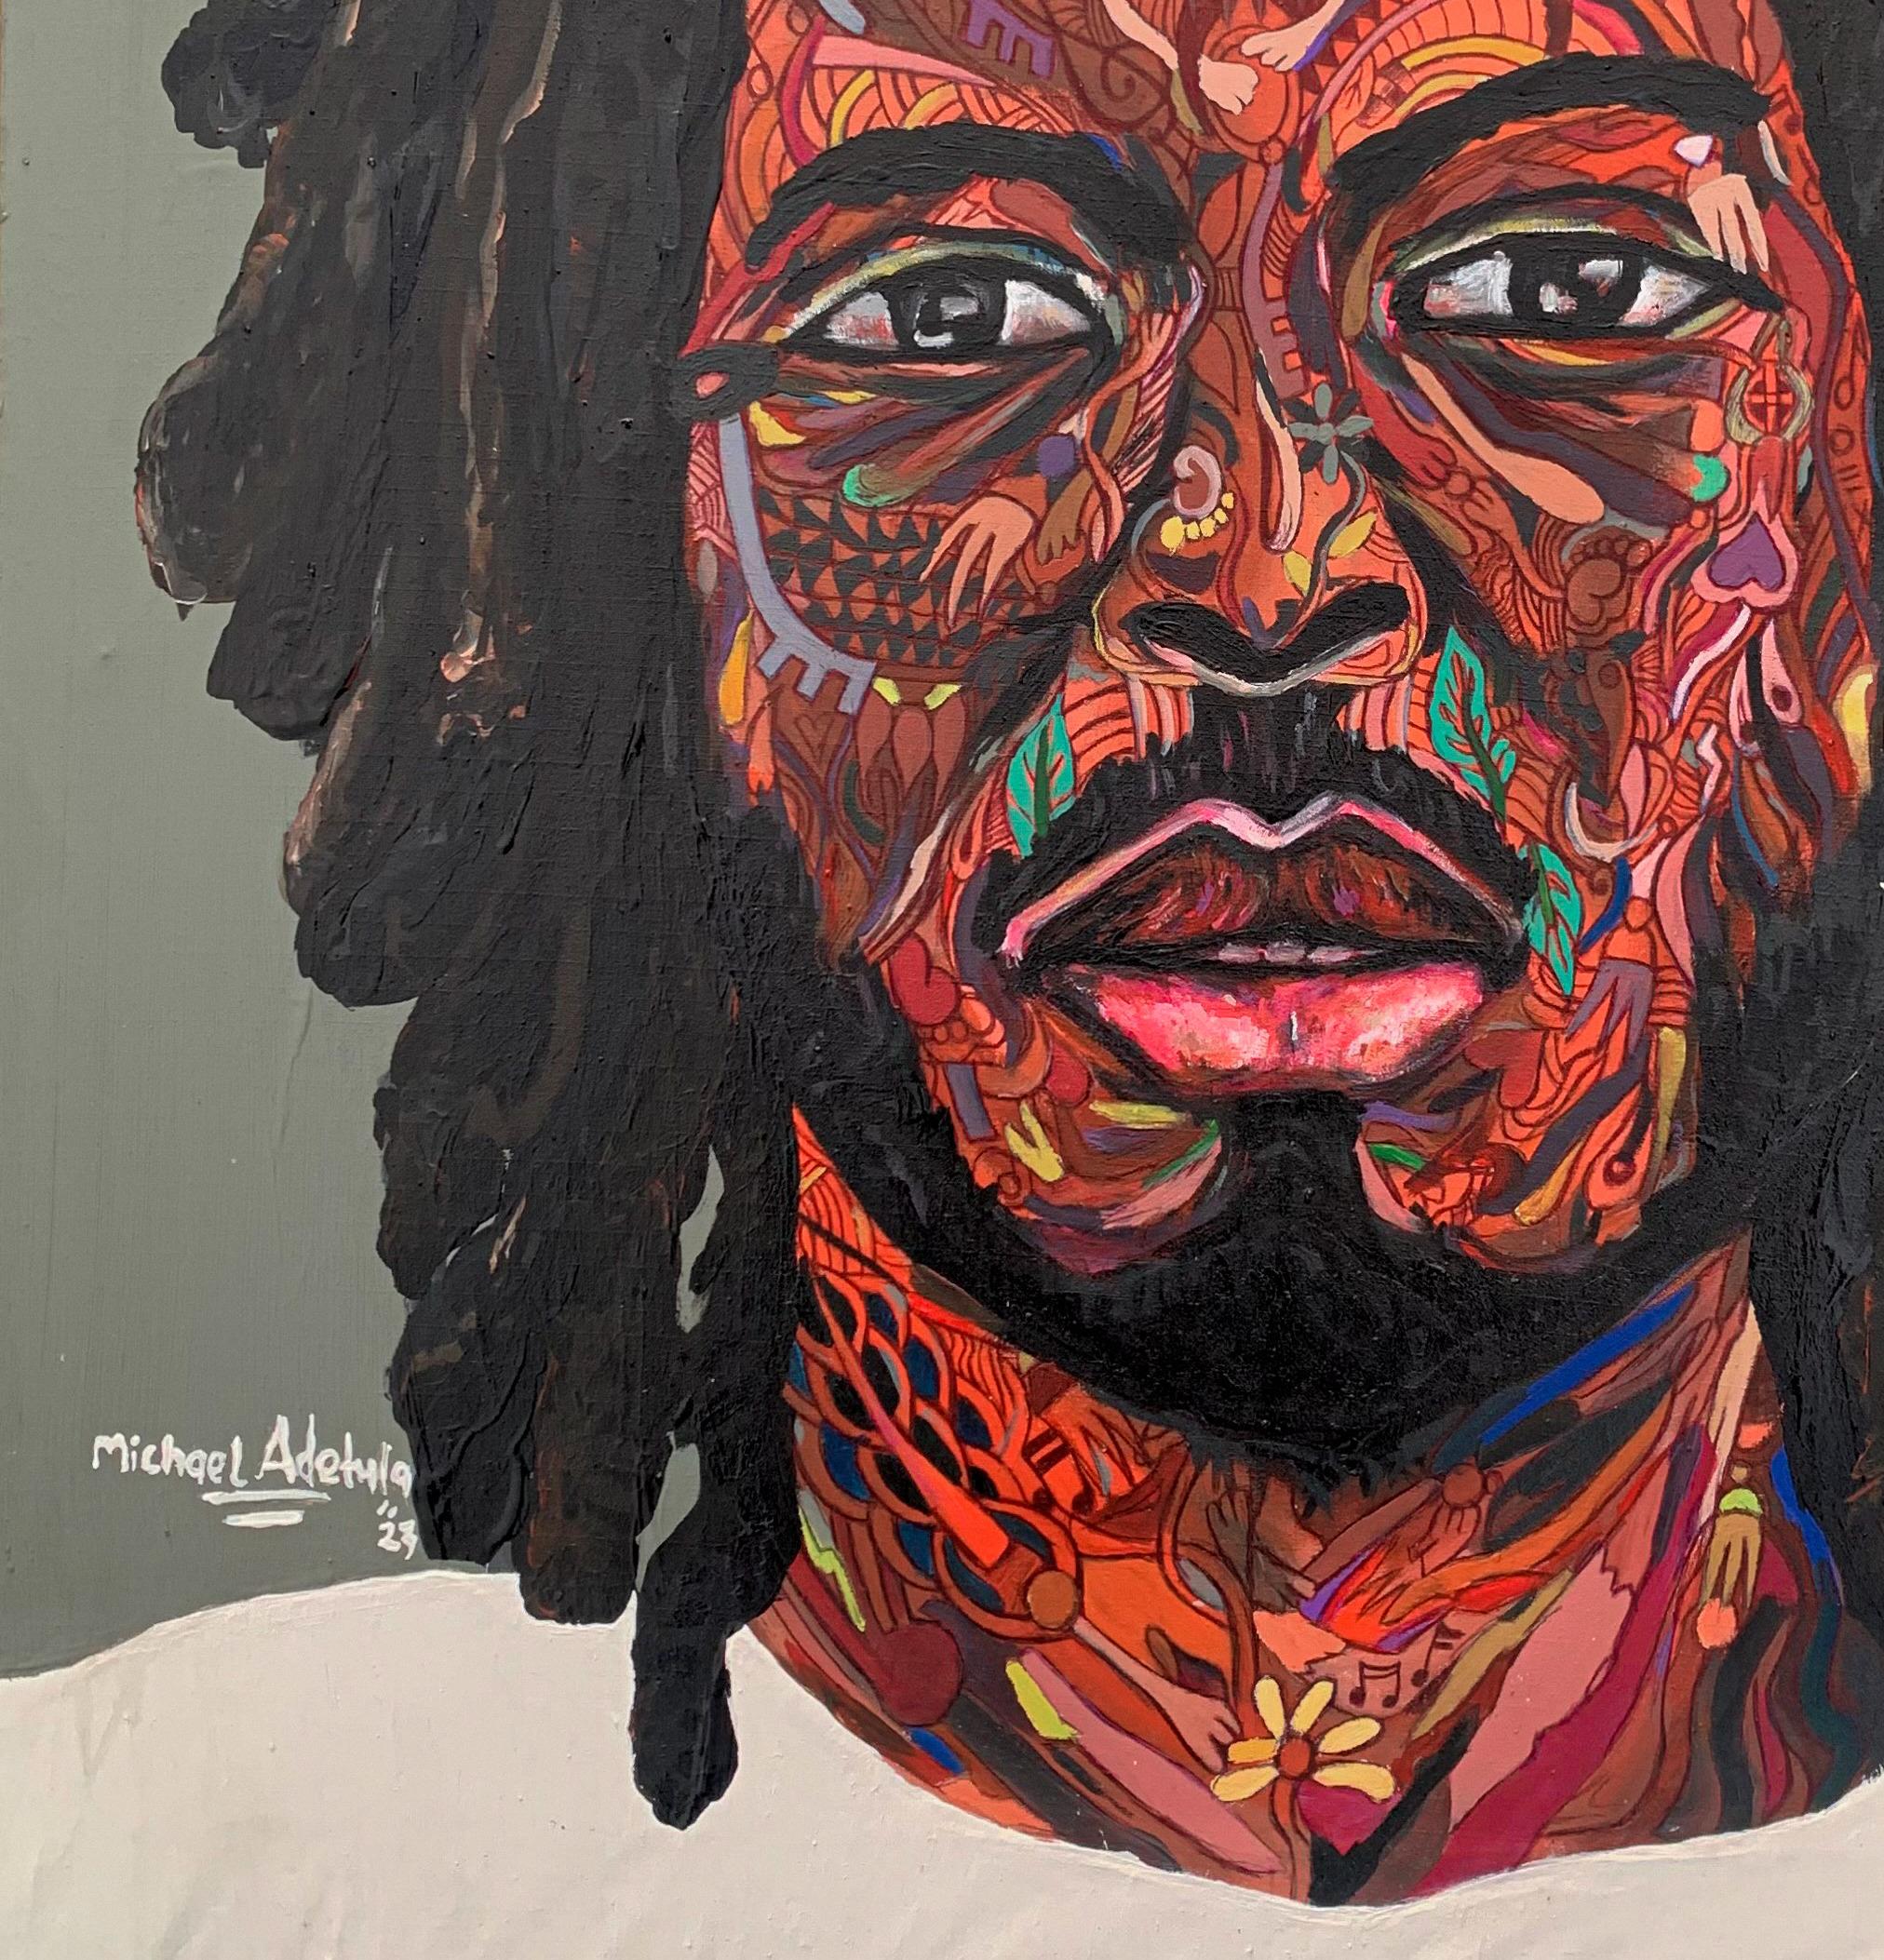 The focal point of the artwork, the man's free-flowing dreadlocks, serves as a potent symbol of individuality and cultural diversity. In many cultures, dreadlocks have deep-rooted historical and spiritual significance, representing a unique